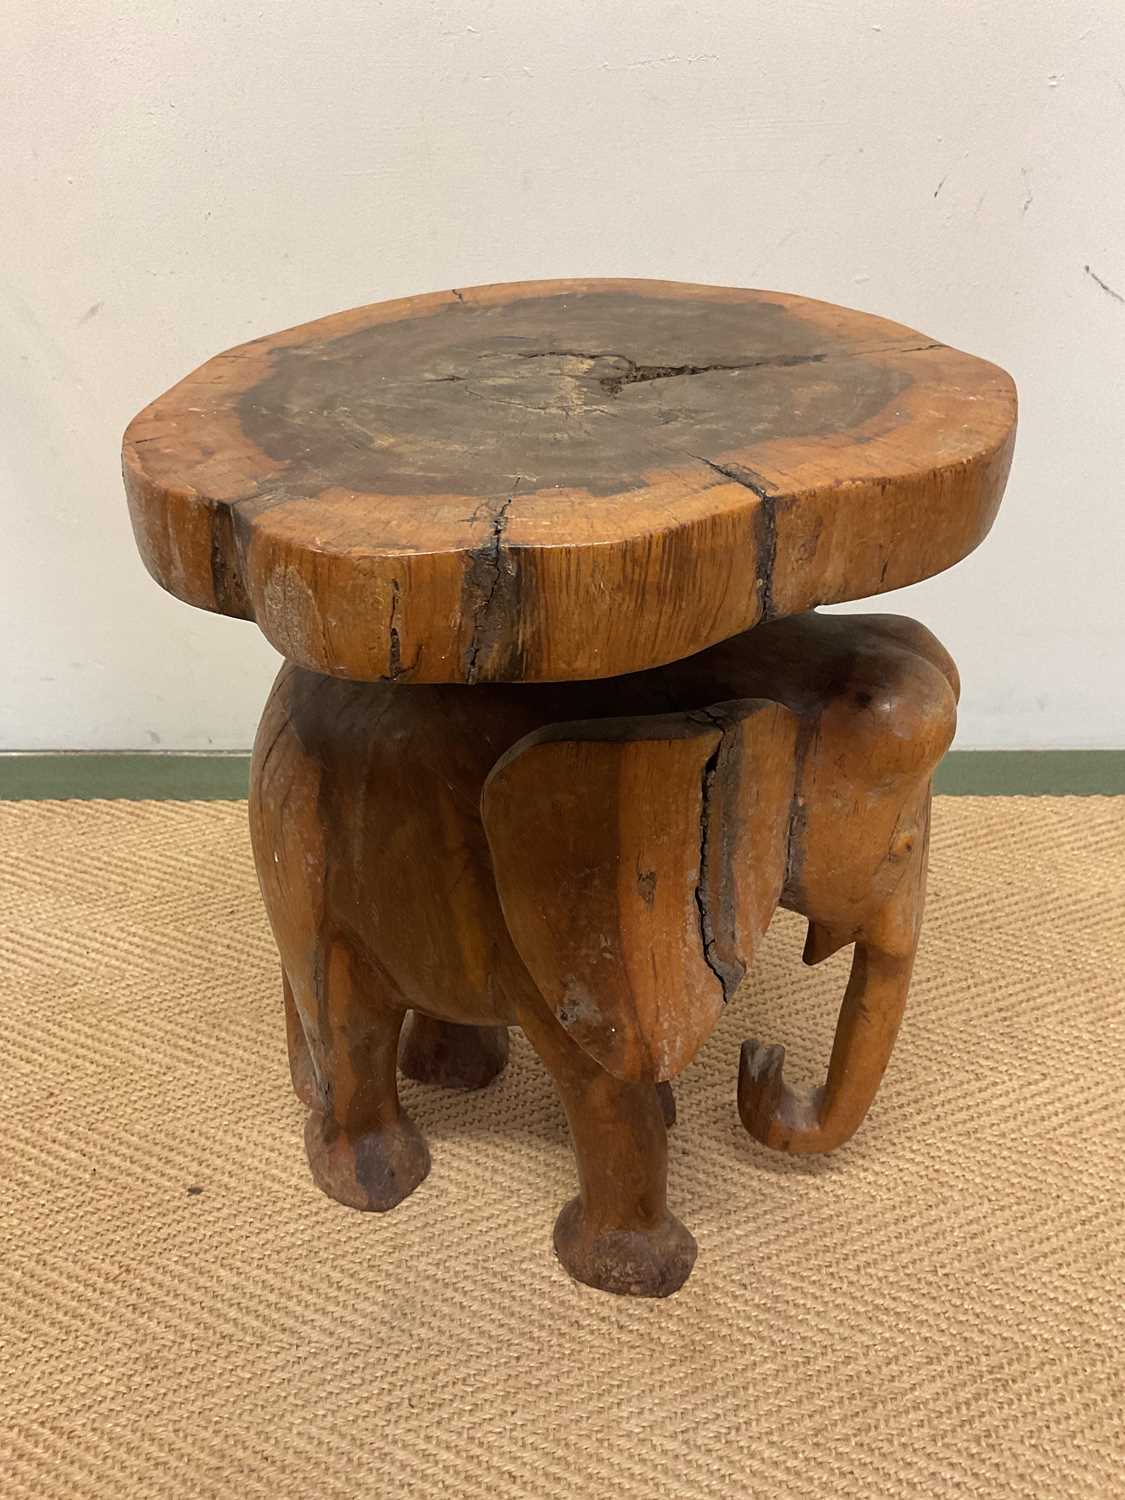 A carved wooden elephant stand, height 39cm, diameter 30cm.